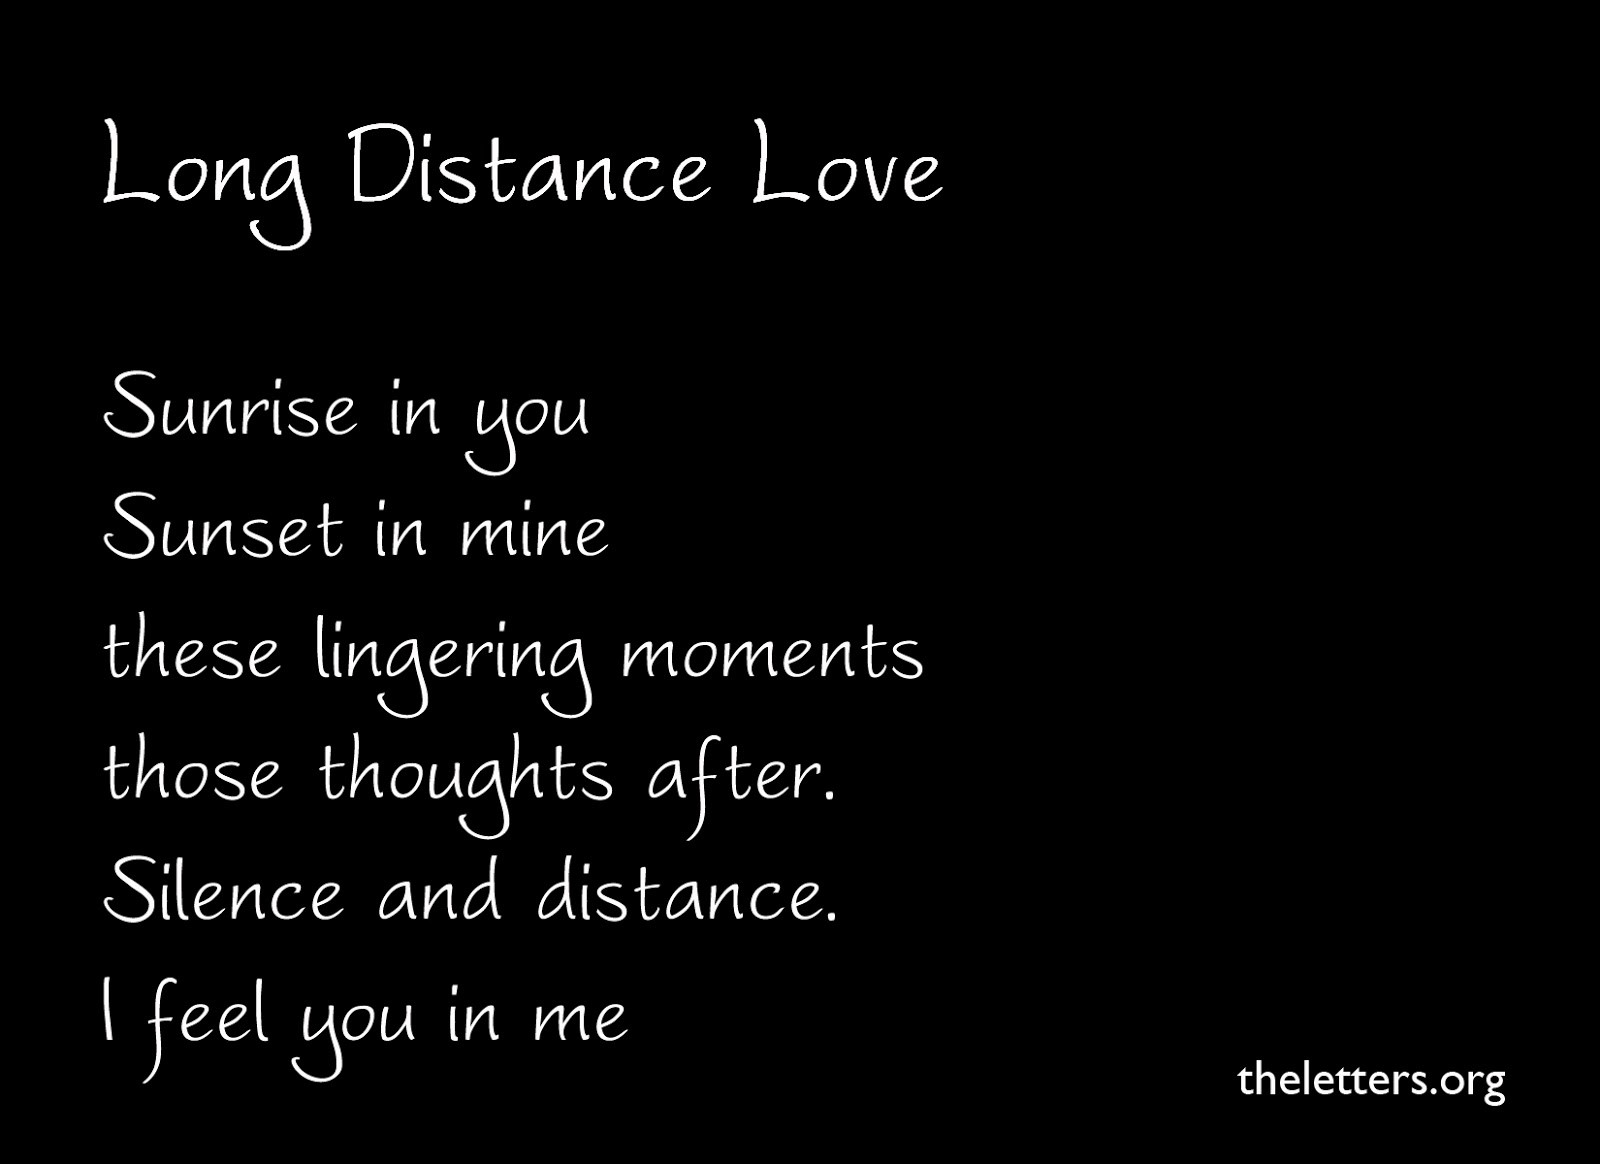 Long Distance Relationship Quote
 Funny Long Distance Relationship Quotes QuotesGram